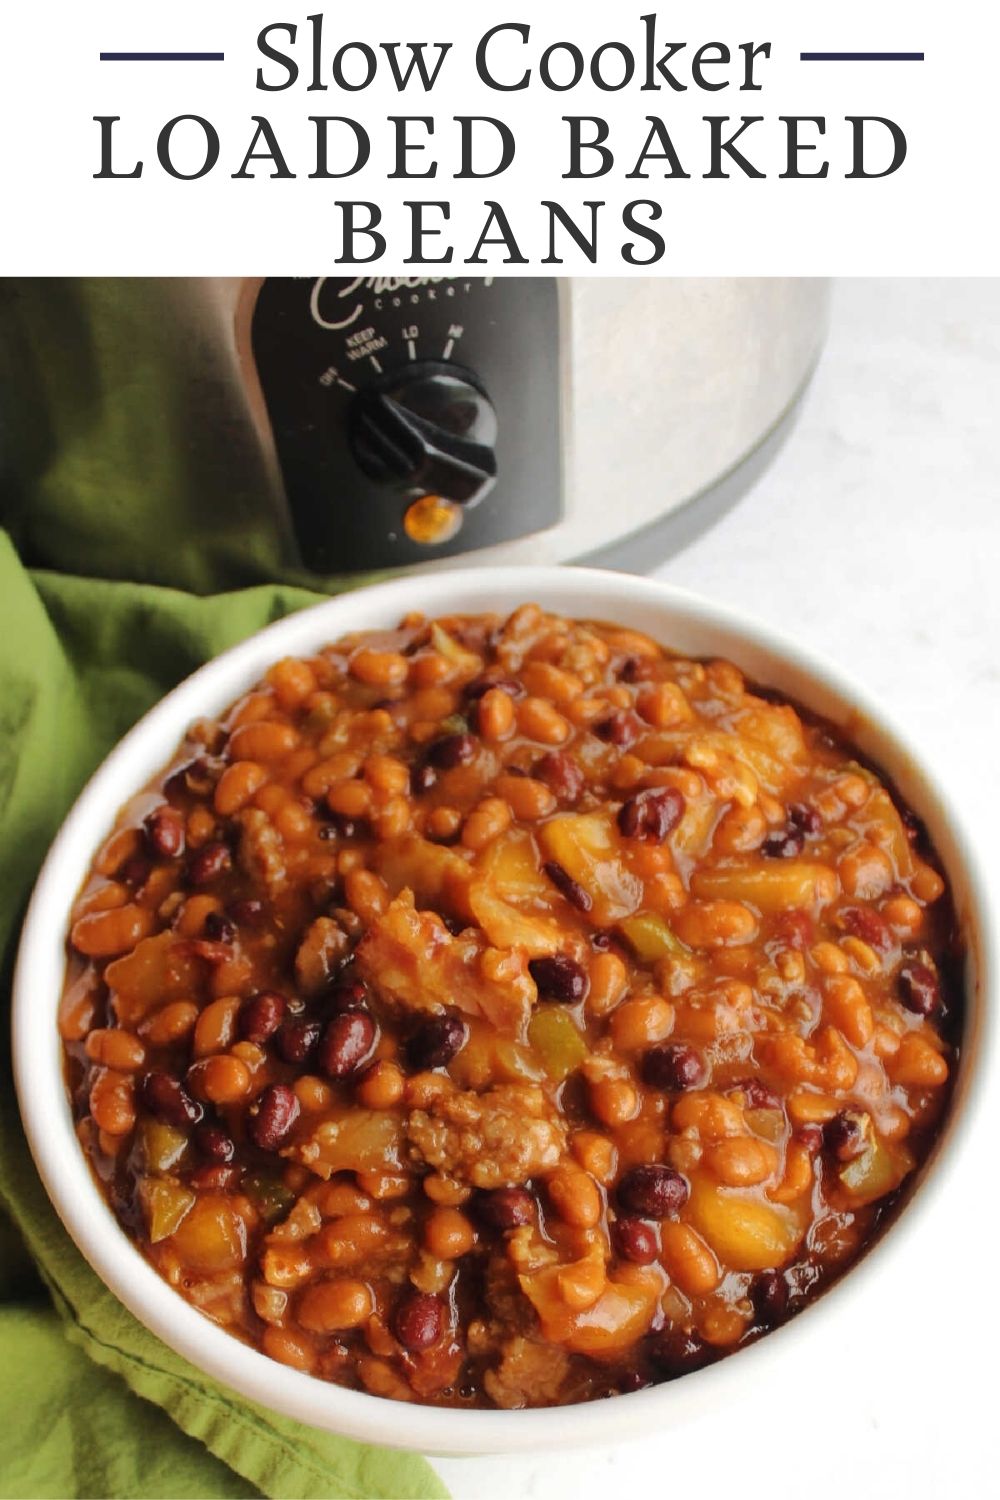 These yummy loaded baked beans are slow cooked to perfection. They have slices of bacon, bits of sausage, a tasty sweet and spicy sauce and even a secret ingredient you would never guess.